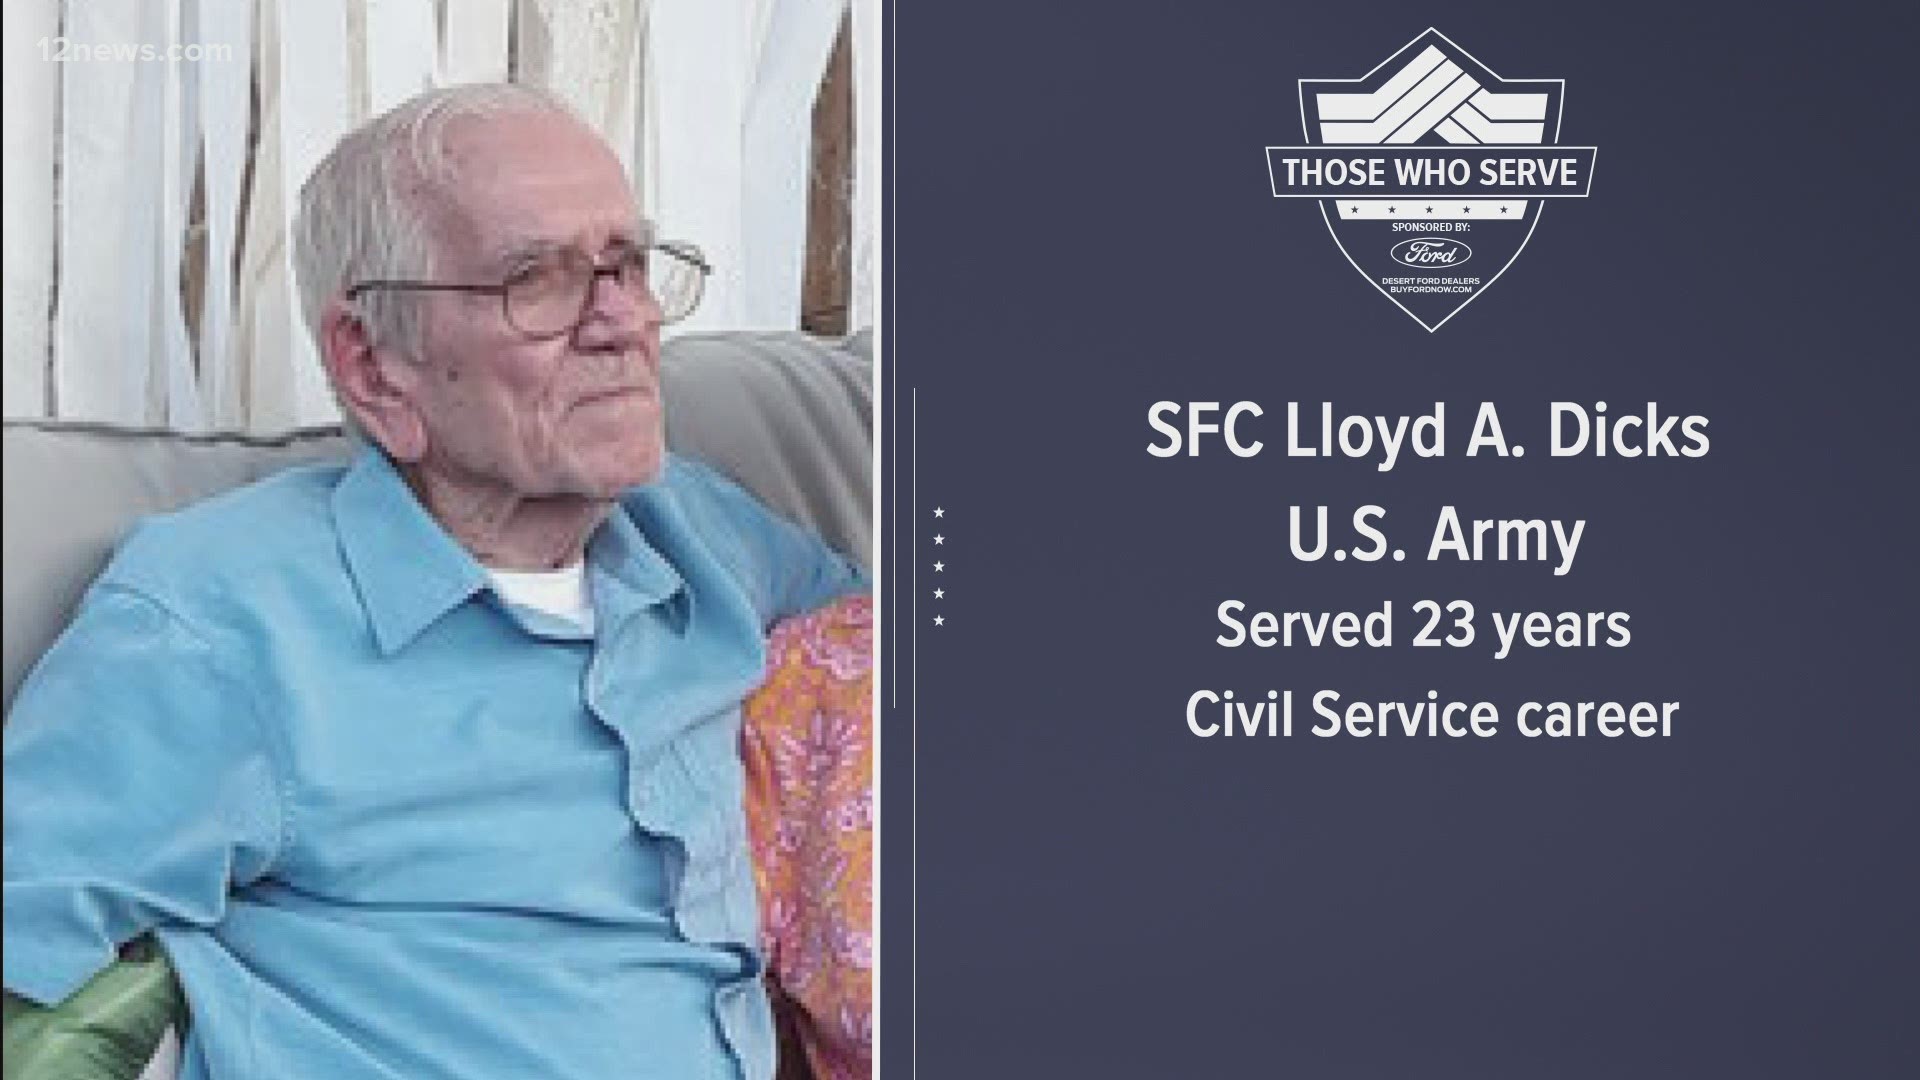 We are saluting Those Who Serve on Today In AZ and we want to shine our spotlight on 82-year-old Sgt. First Class Lloyd A. Dicks.